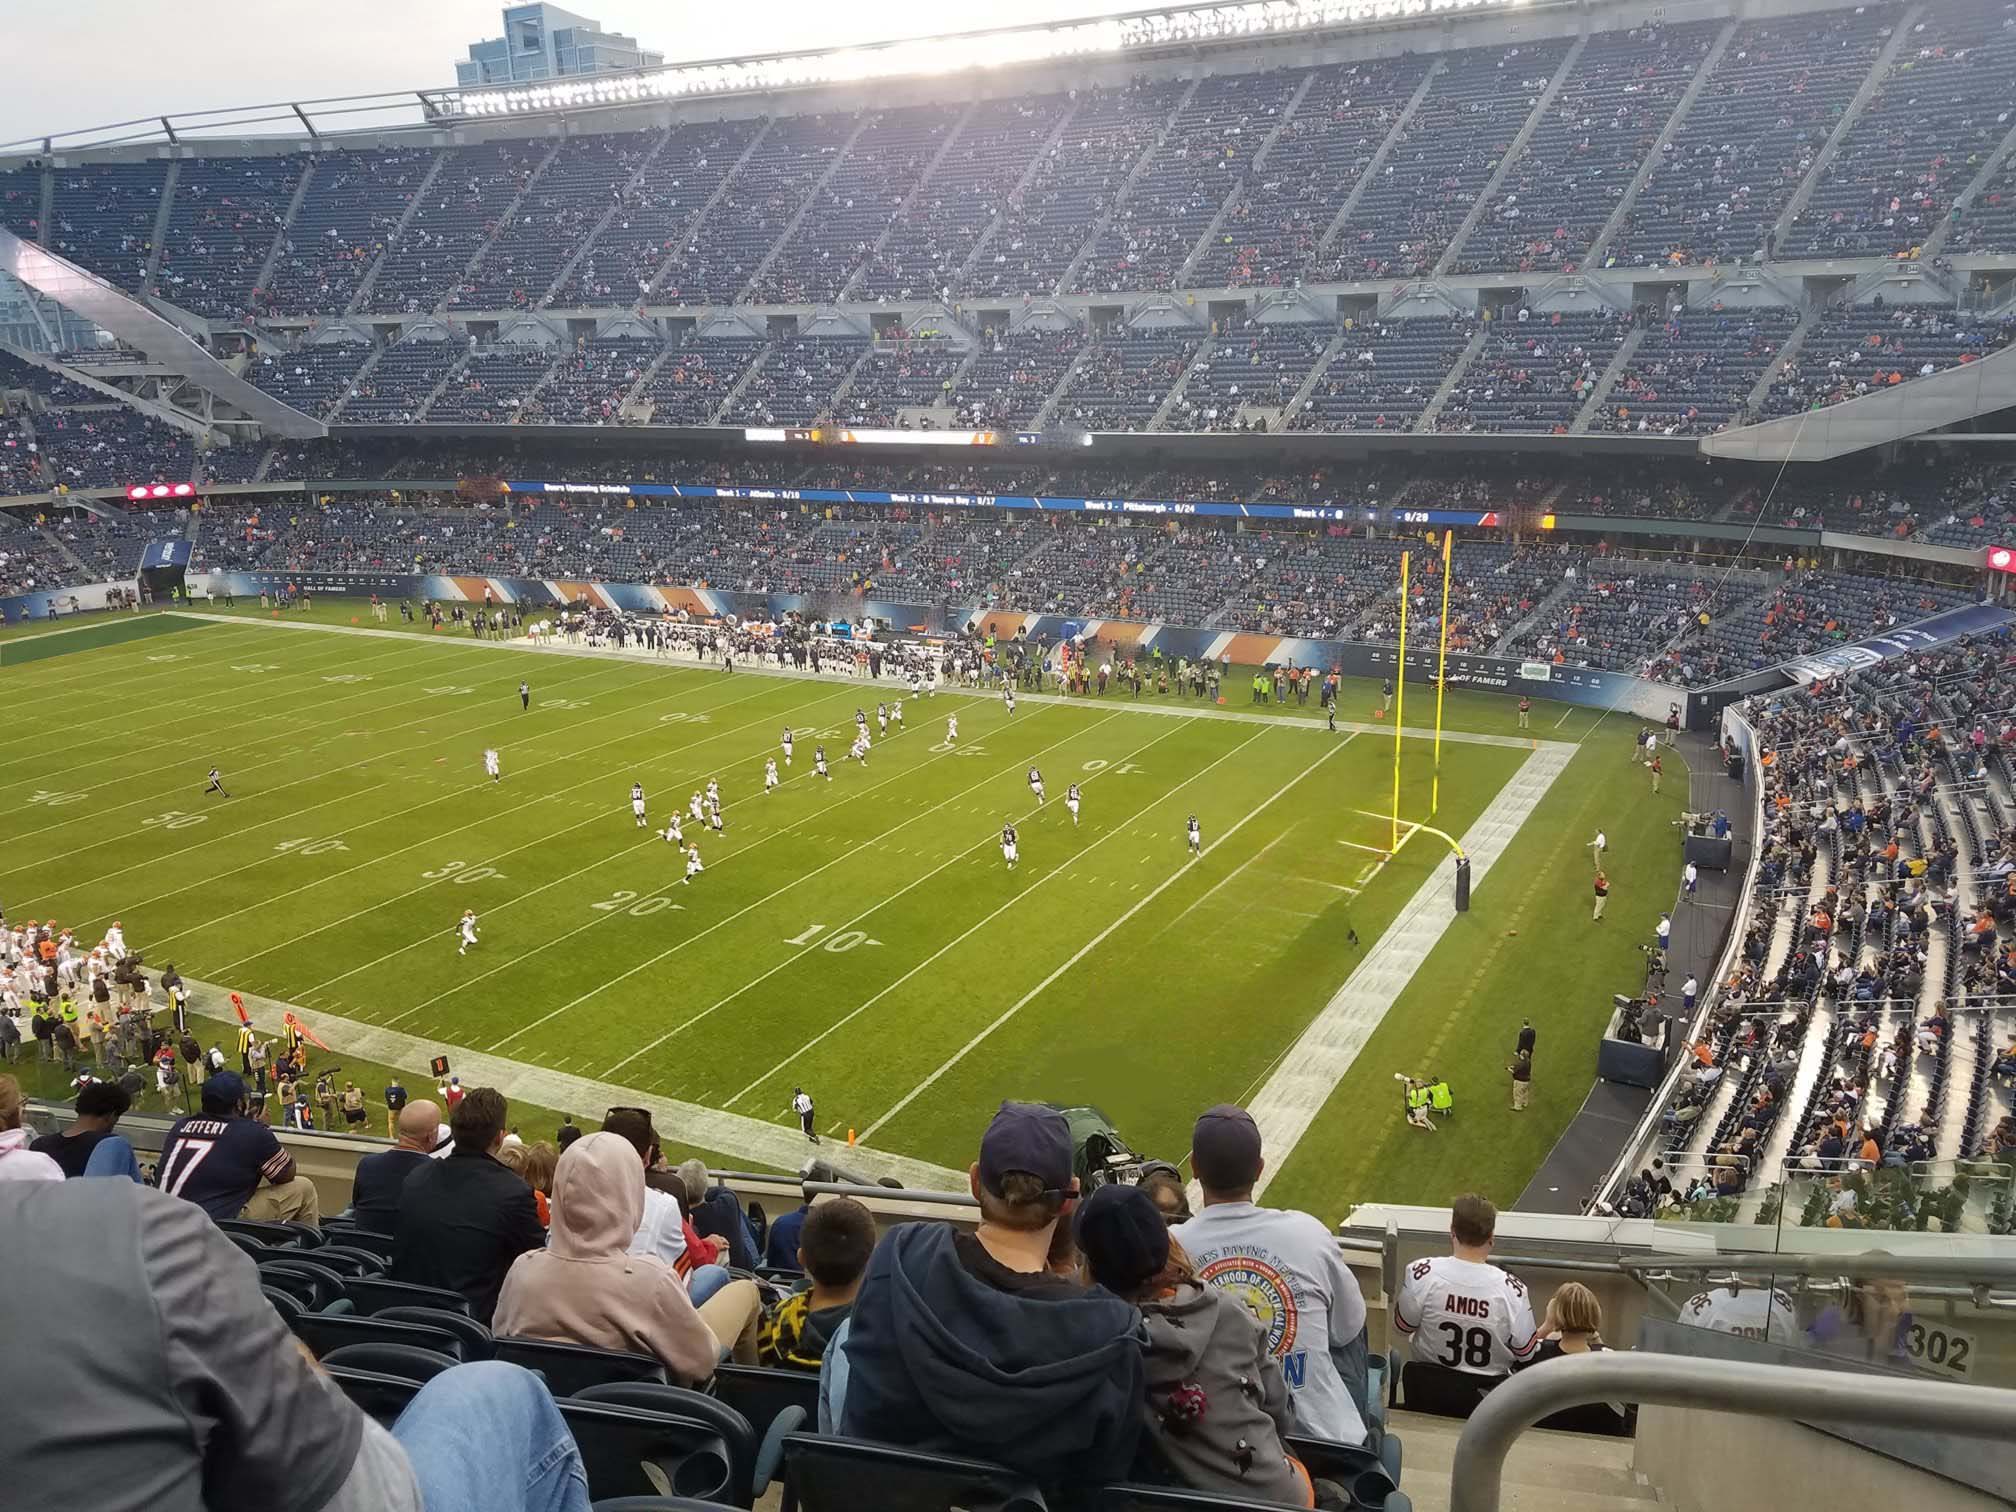 section 303, row 10 seat view  for football - soldier field